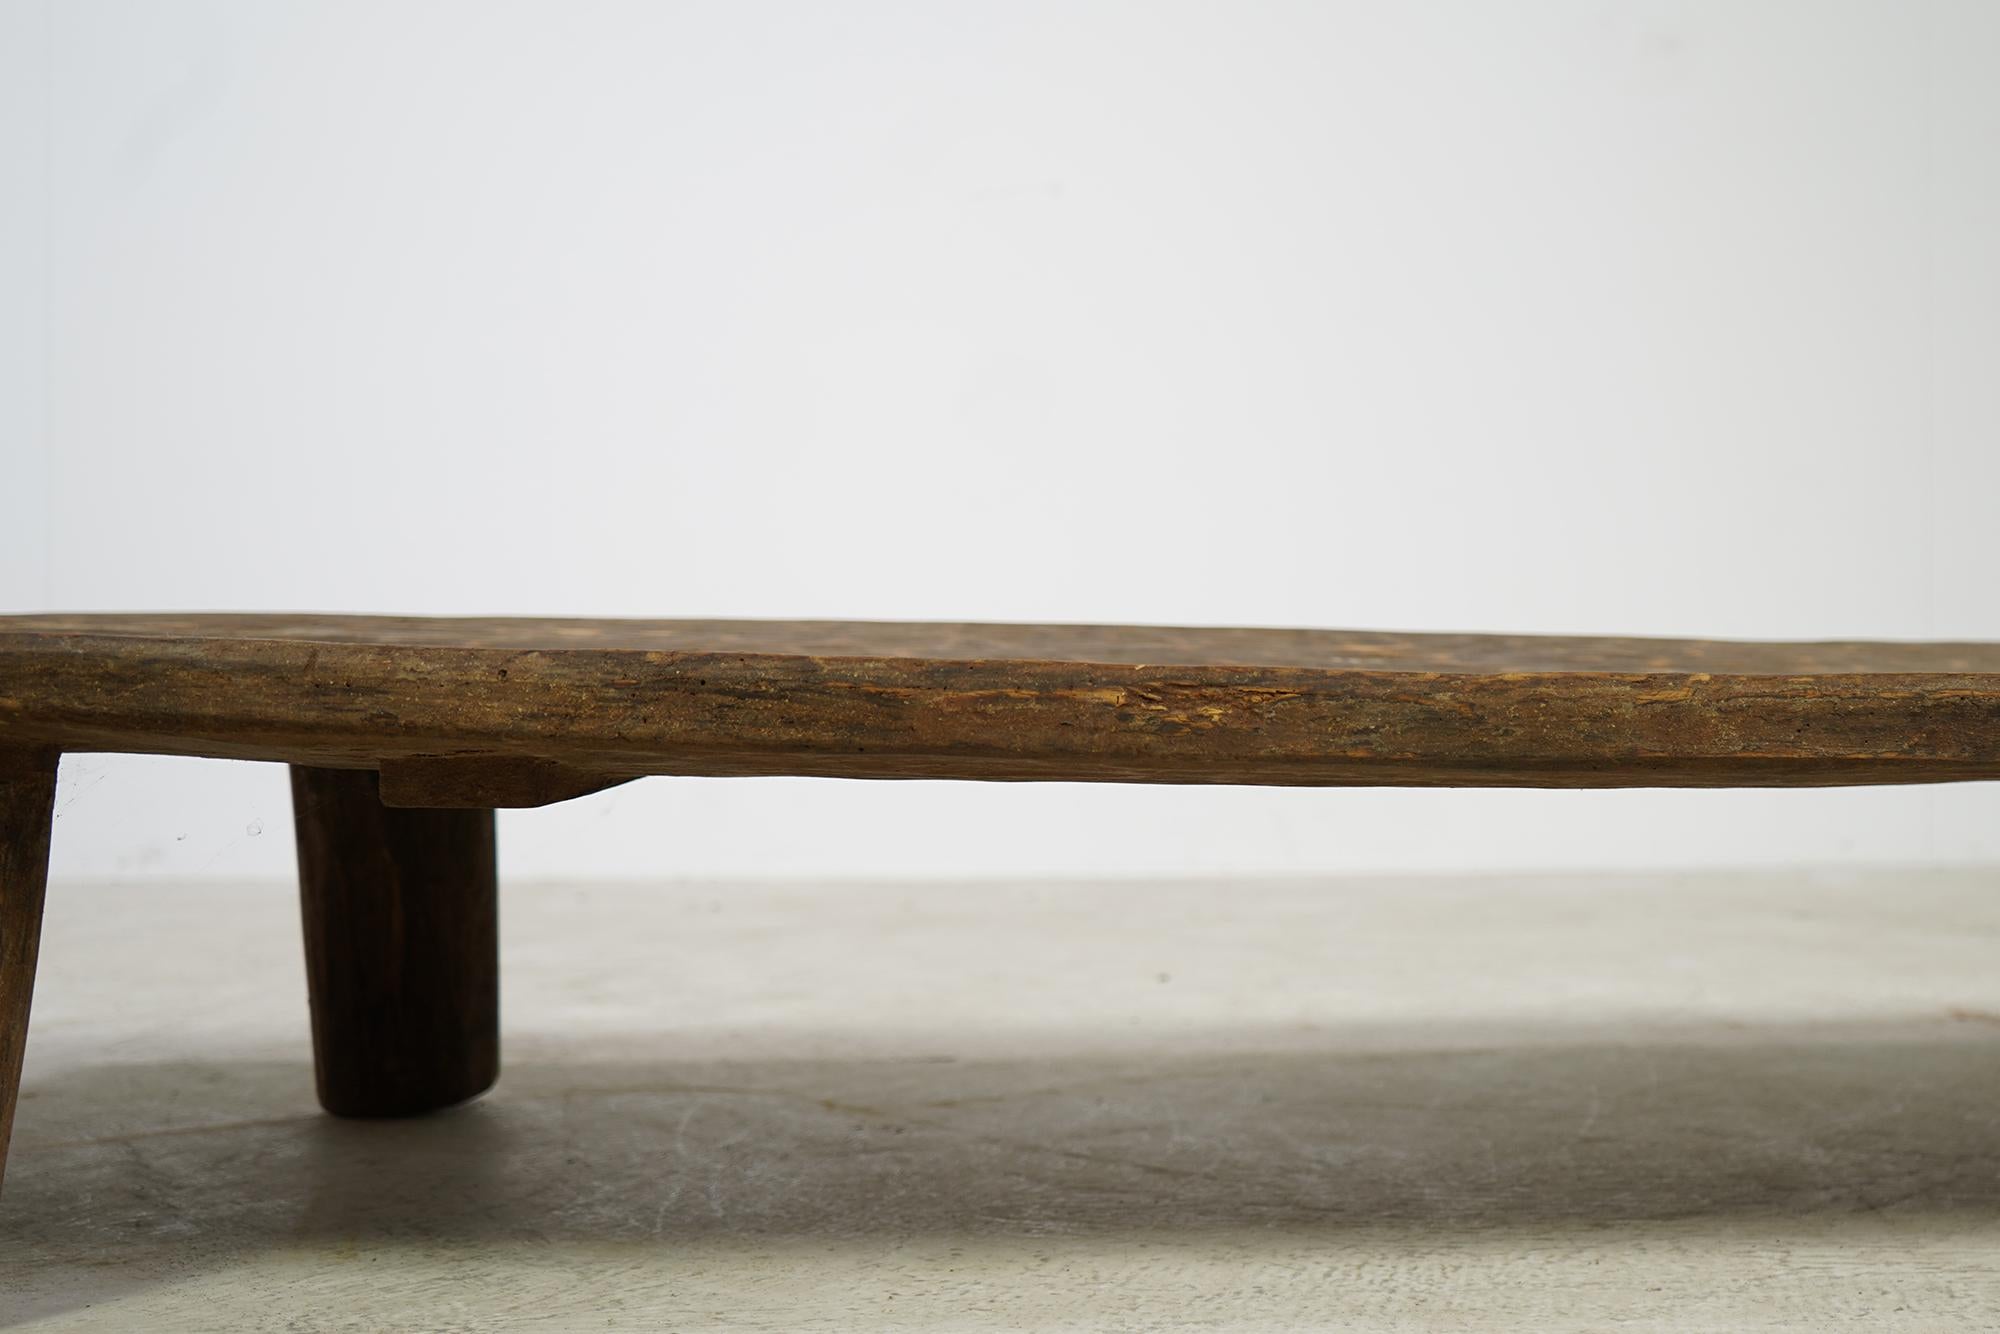 Rustic Naga Table or Bench, Hand Carved Wabi Sabi Style, Ancient Wood 'A' In Good Condition For Sale In Hamminkeln, DE